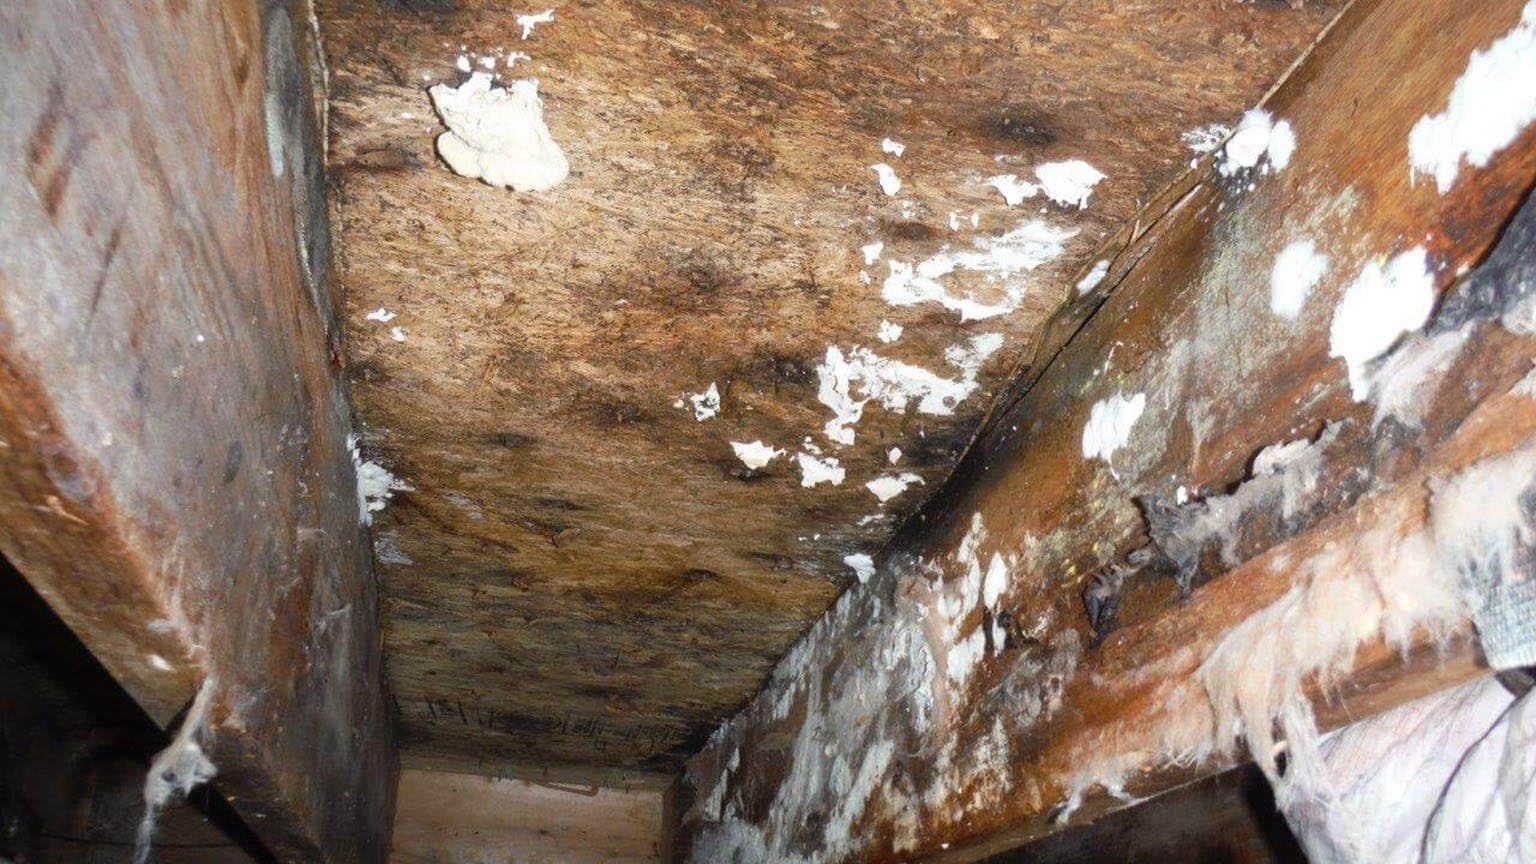 Mold Growth on Wooden Surfaces